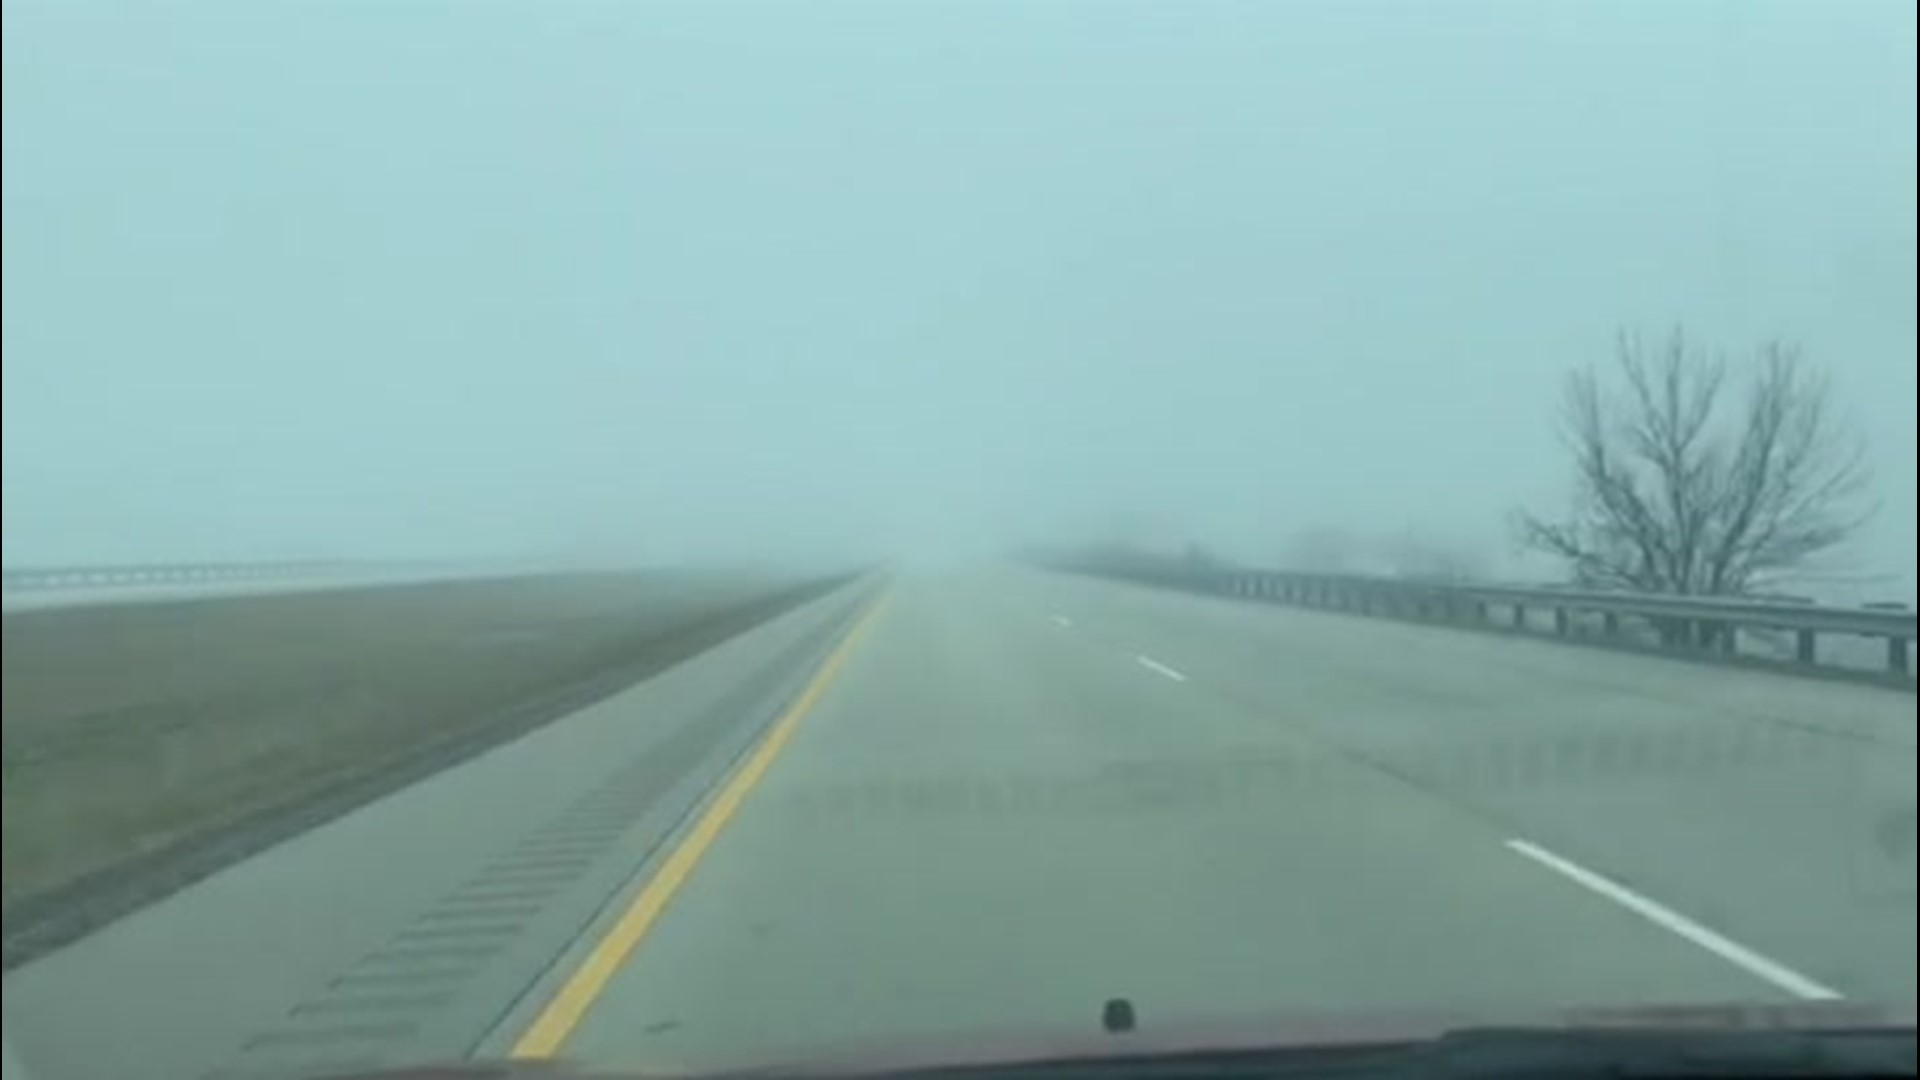 Visibility along Interstate 94 was heavily reduced in Champaign, Illinois, on March 25, as fog settled in along the road.